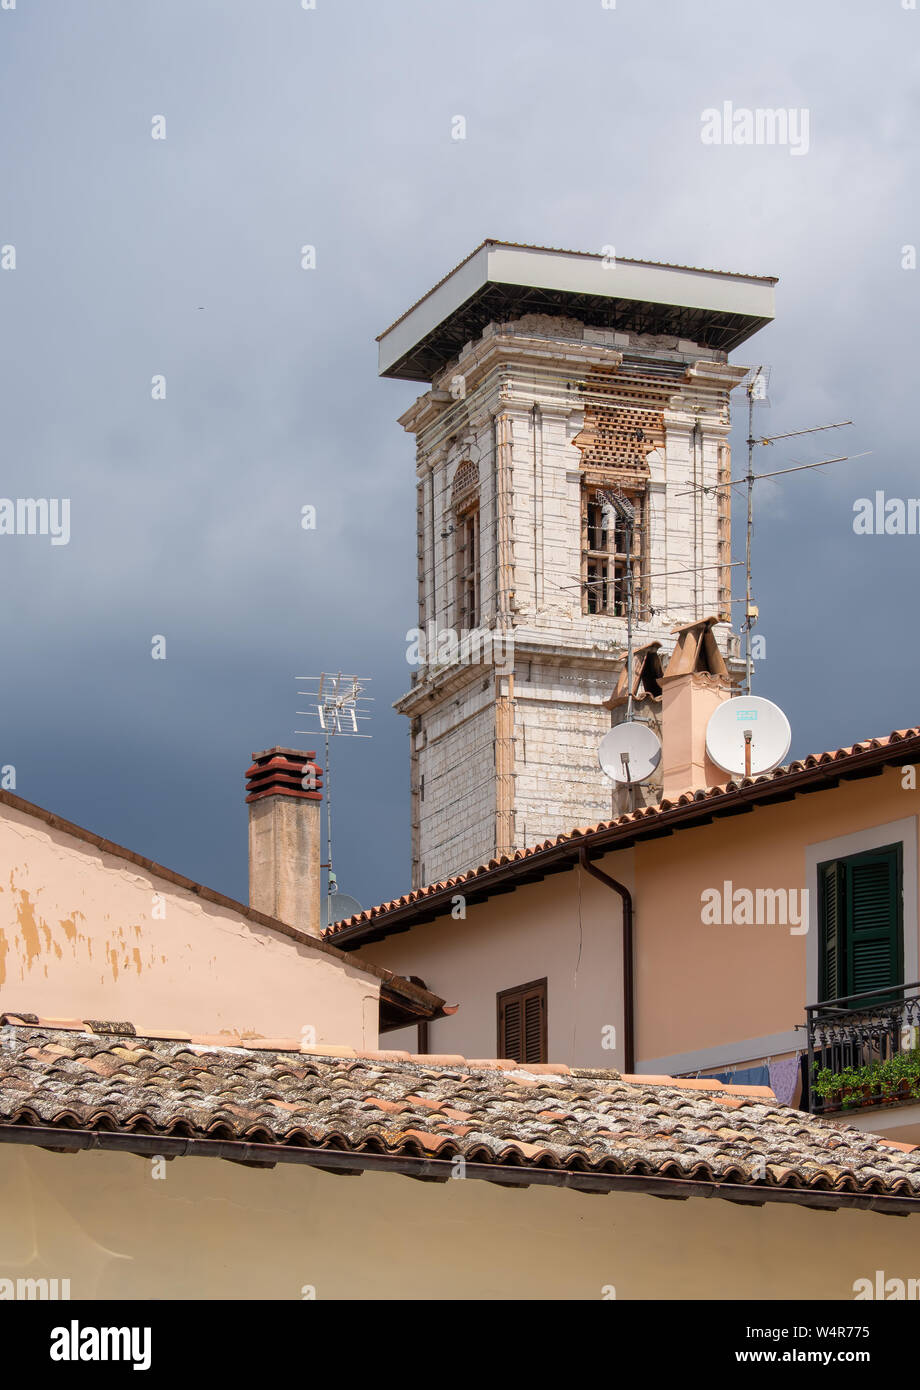 NORCIA, ITALY JULY 13, 2019: Three years after the devastating earthquake, much work still needs to be done in the area. Tower still to be mended. Stock Photo